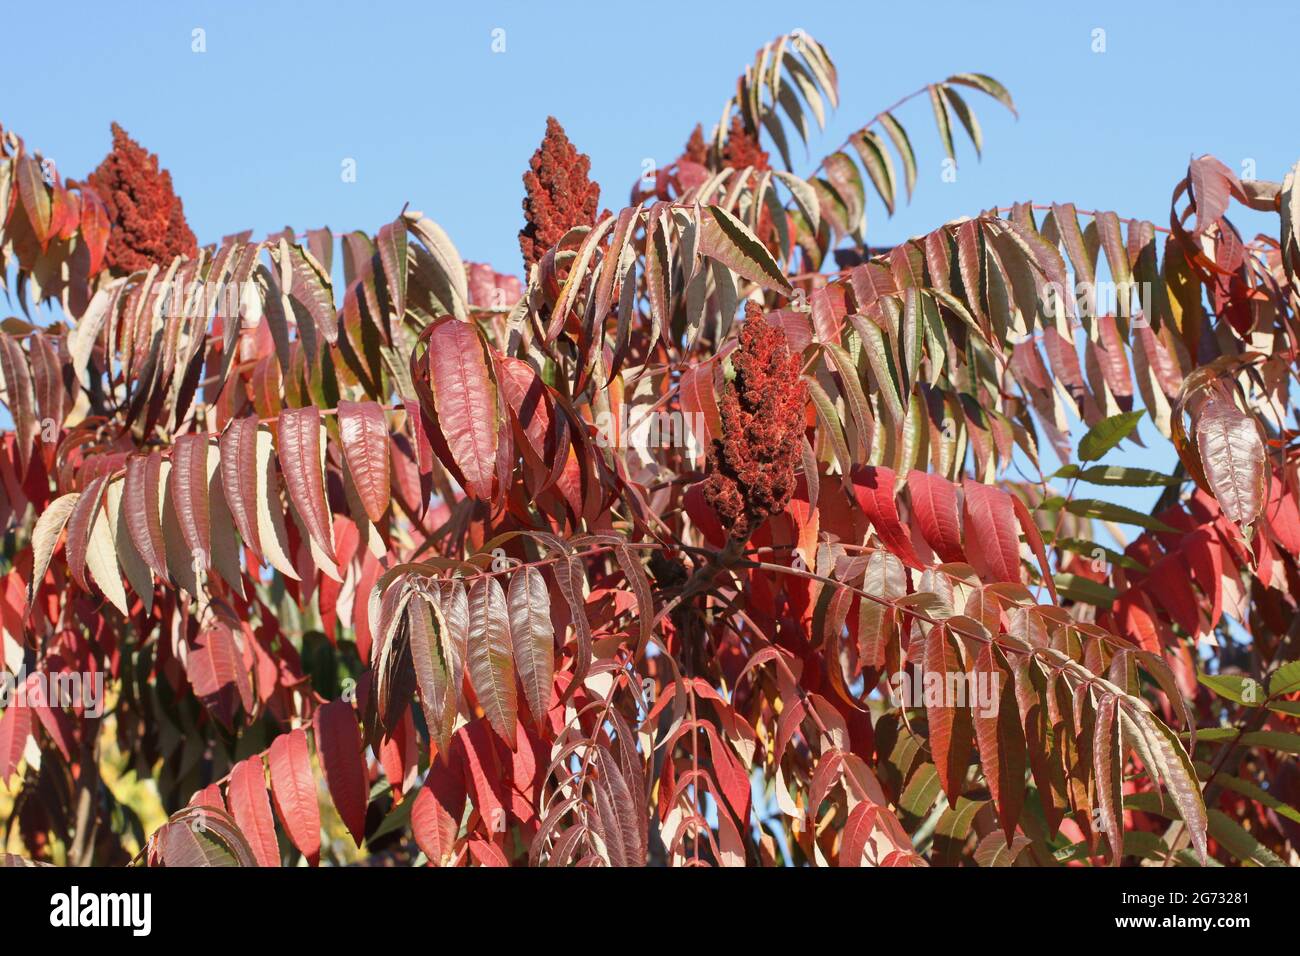 Autumn - purple and red leaves on sumac tree against blue sky Stock Photo